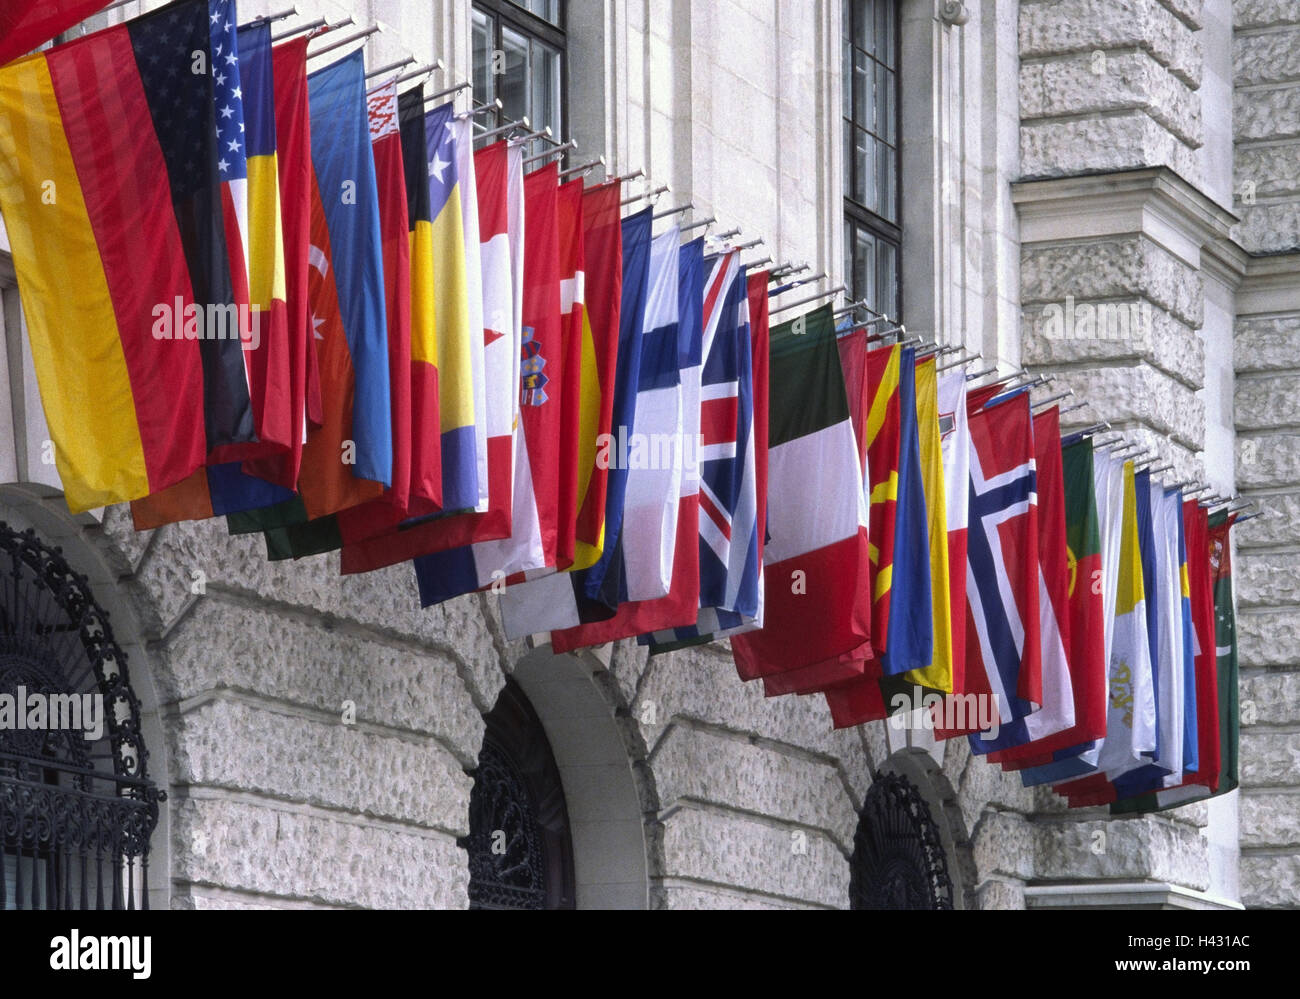 Austria, Vienna, new Hofburg, facade, detail, flags, Europe, town, capital, building, curves, windows, flags, flag, flags of the country, flags of the country, national flags, national flags, parliament, architecture, nations, outside Stock Photo